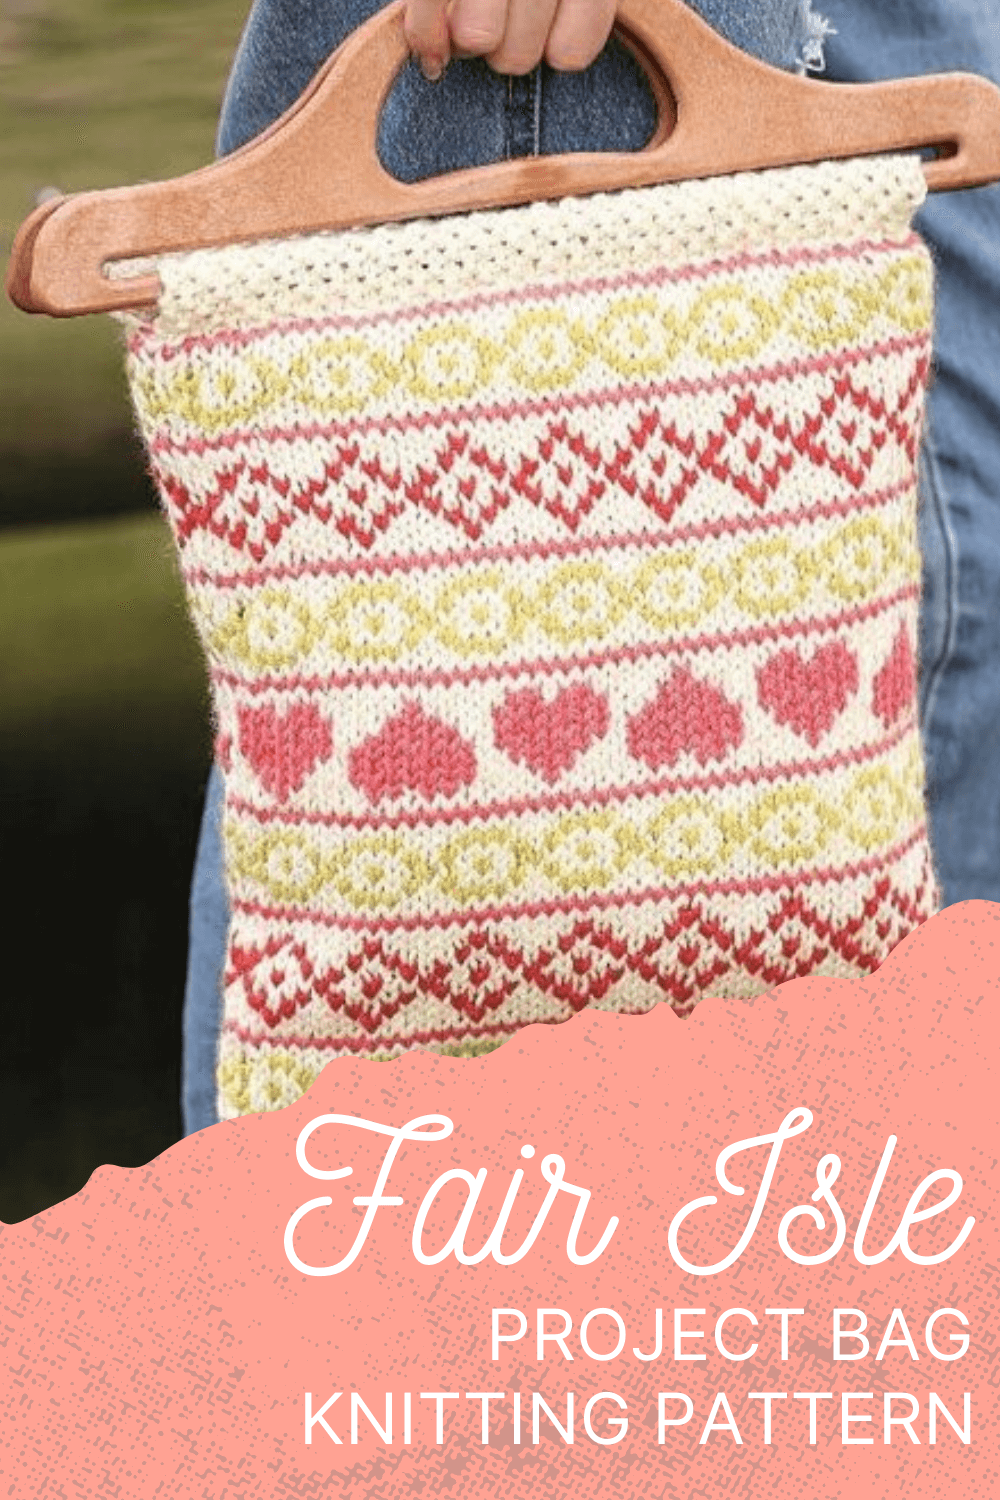 Knit your own knitting project bag with the Fair Isle bag knitting pattern designed by Sian Brown